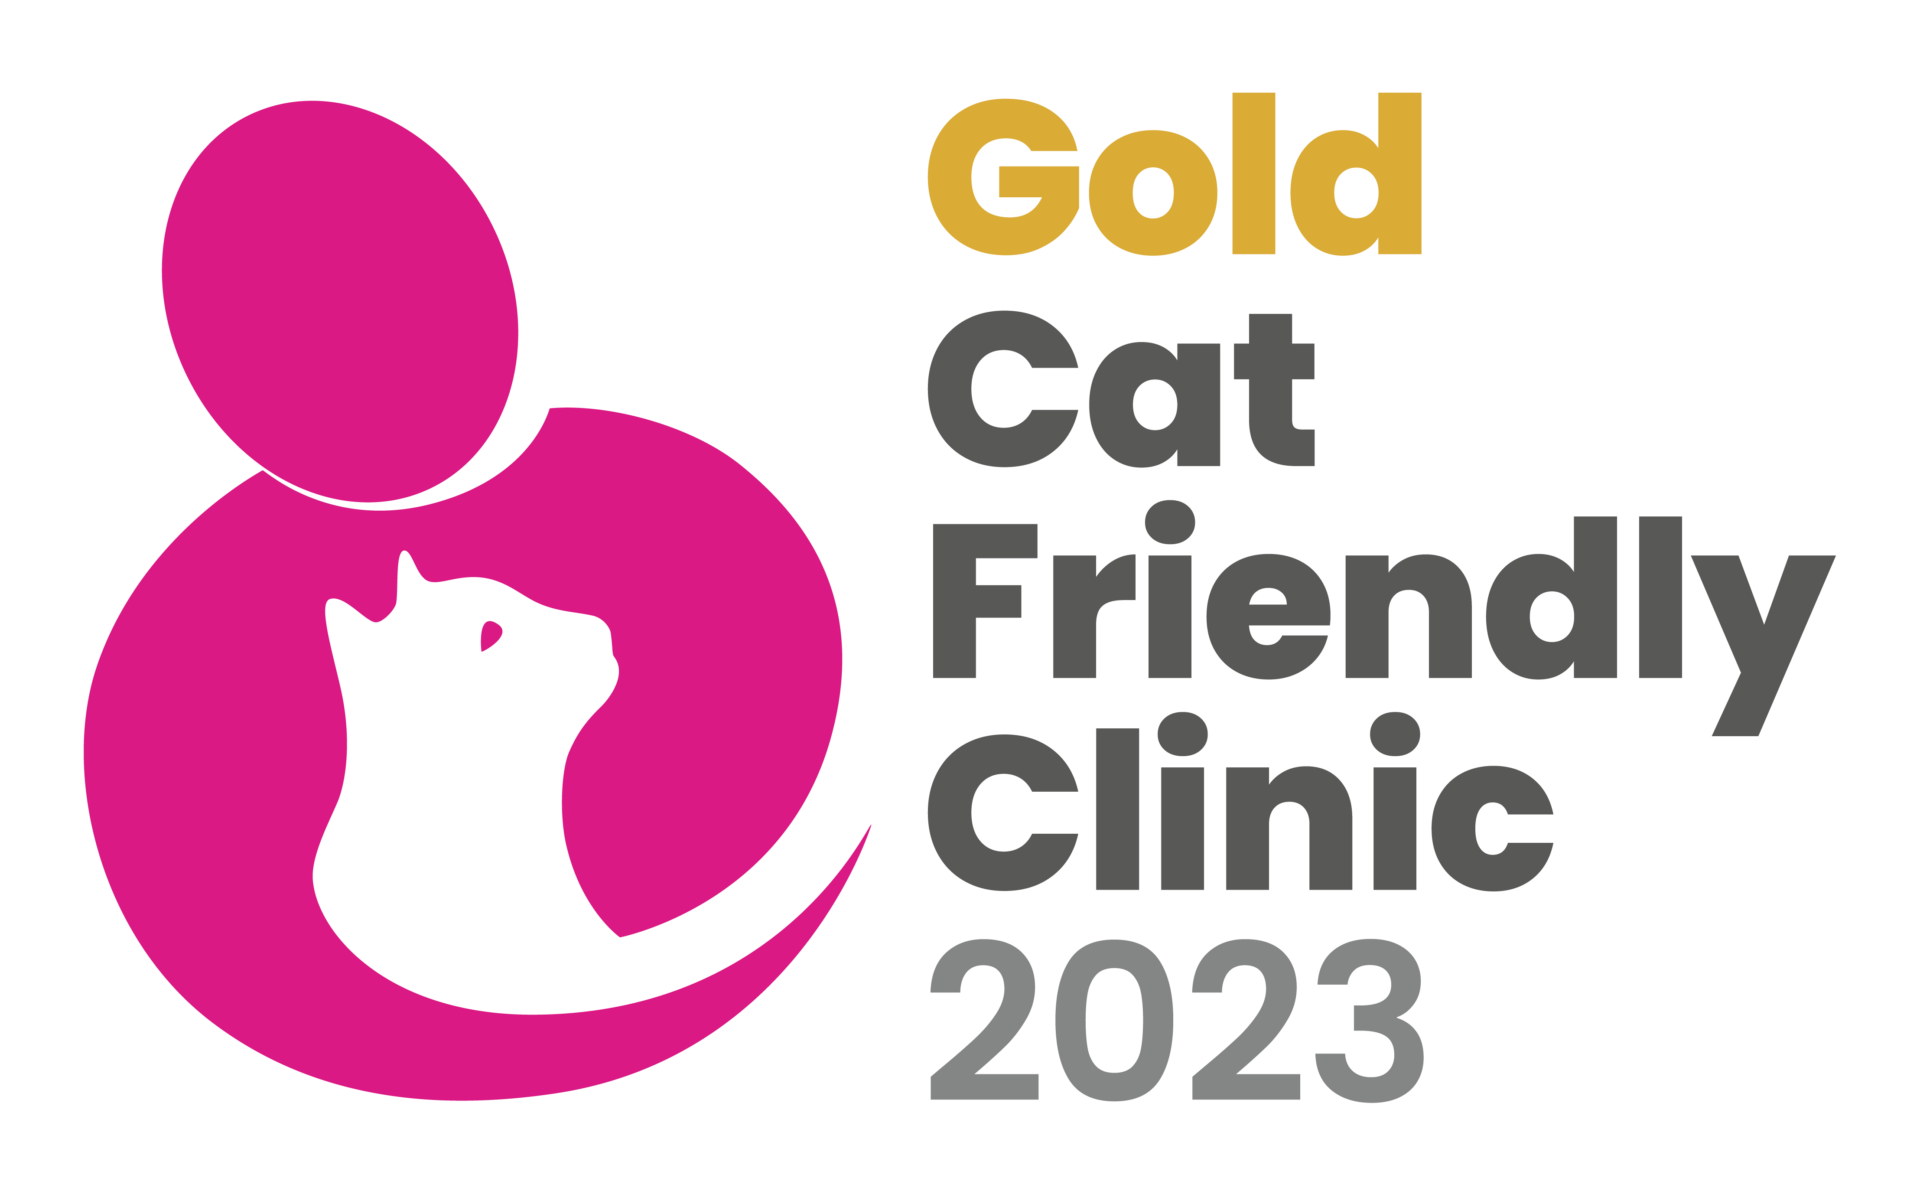 Gold Cat Friendly Clinic 2023